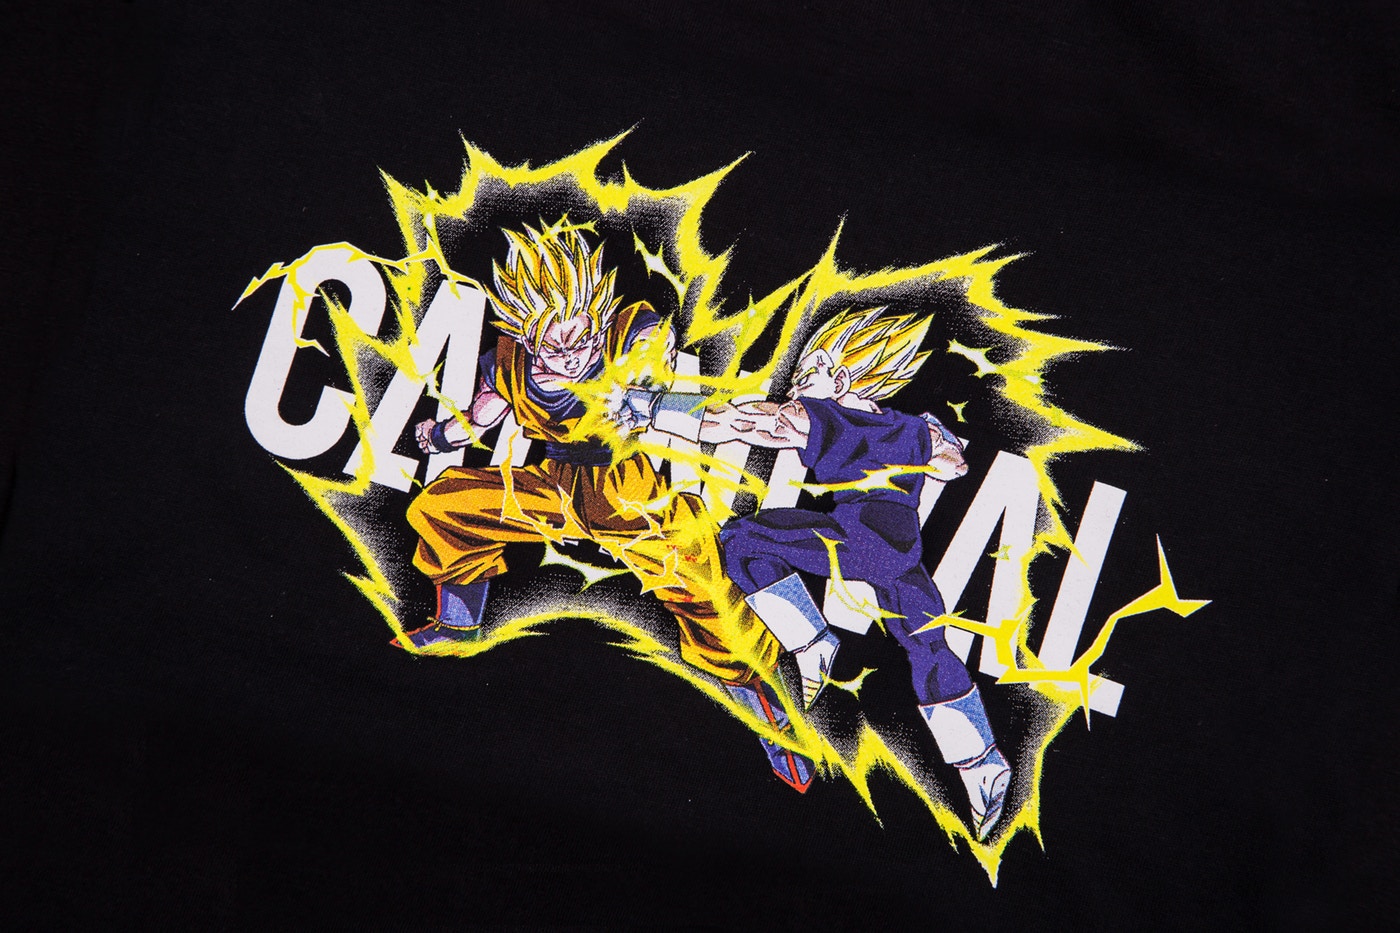 CARNIVAL x Dragon Ball Z livrent une collection capsule collector